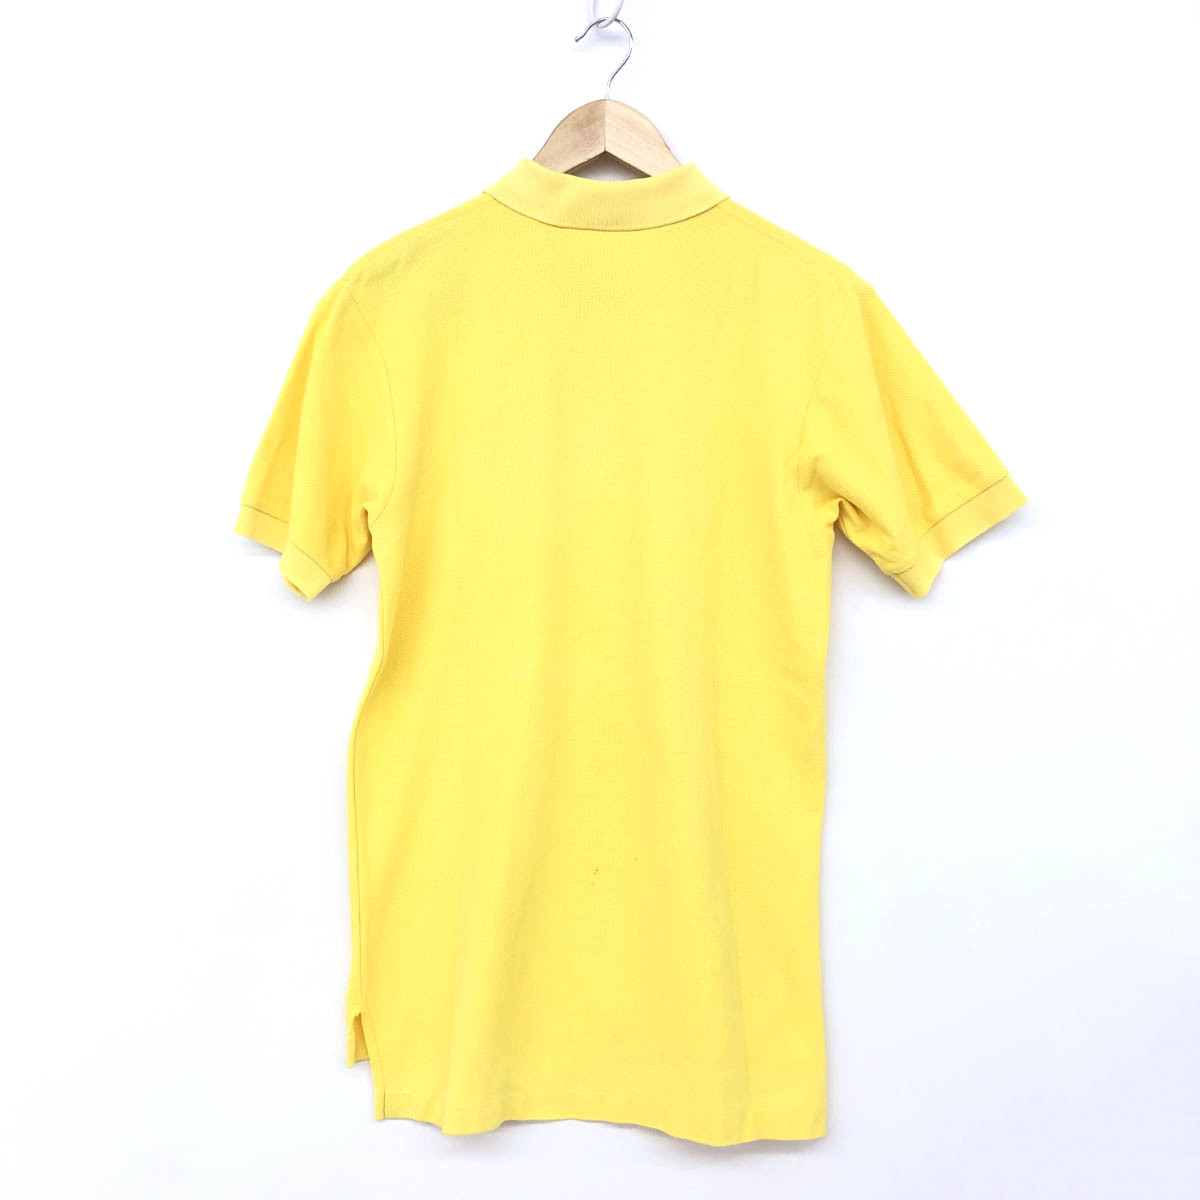 *Yves Saint Laurent rive gauche Eve sun rolan rib go-shu polo-shirt with short sleeves size S* yellow men's tops YSL embroidery 